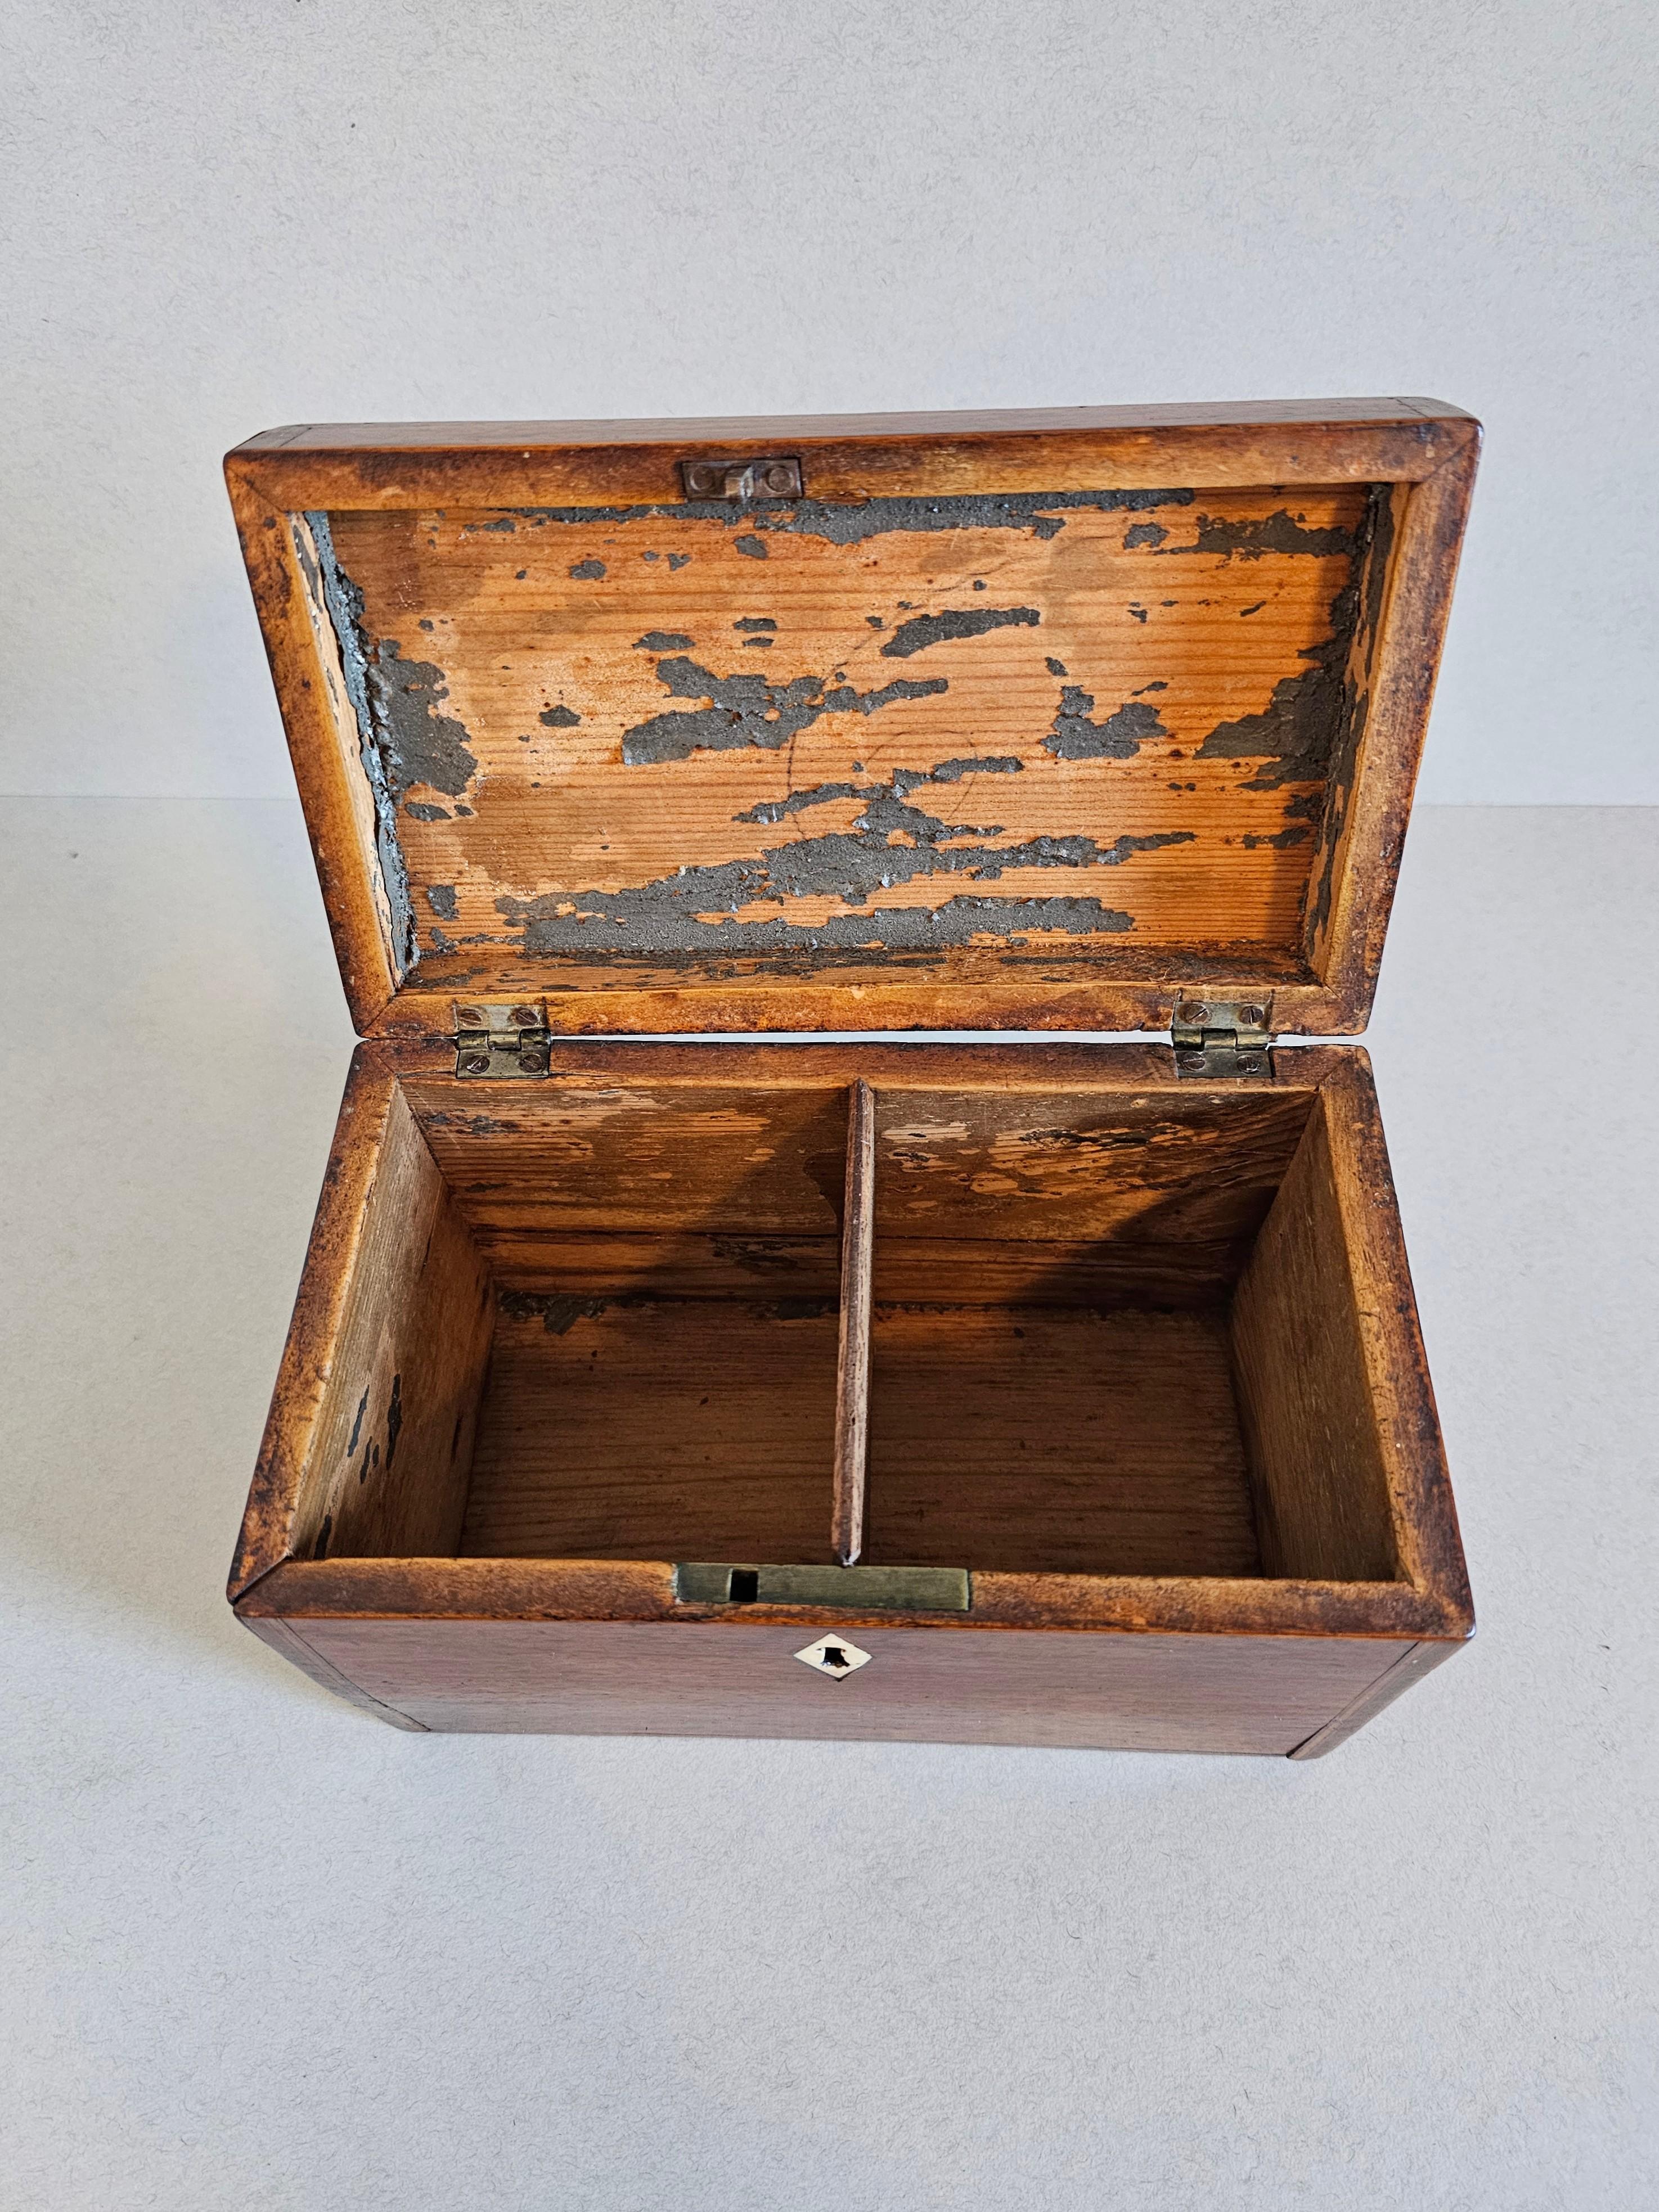 Antique English Georgian Period Mahogany Tea Caddy circa 1800 In Good Condition For Sale In Forney, TX